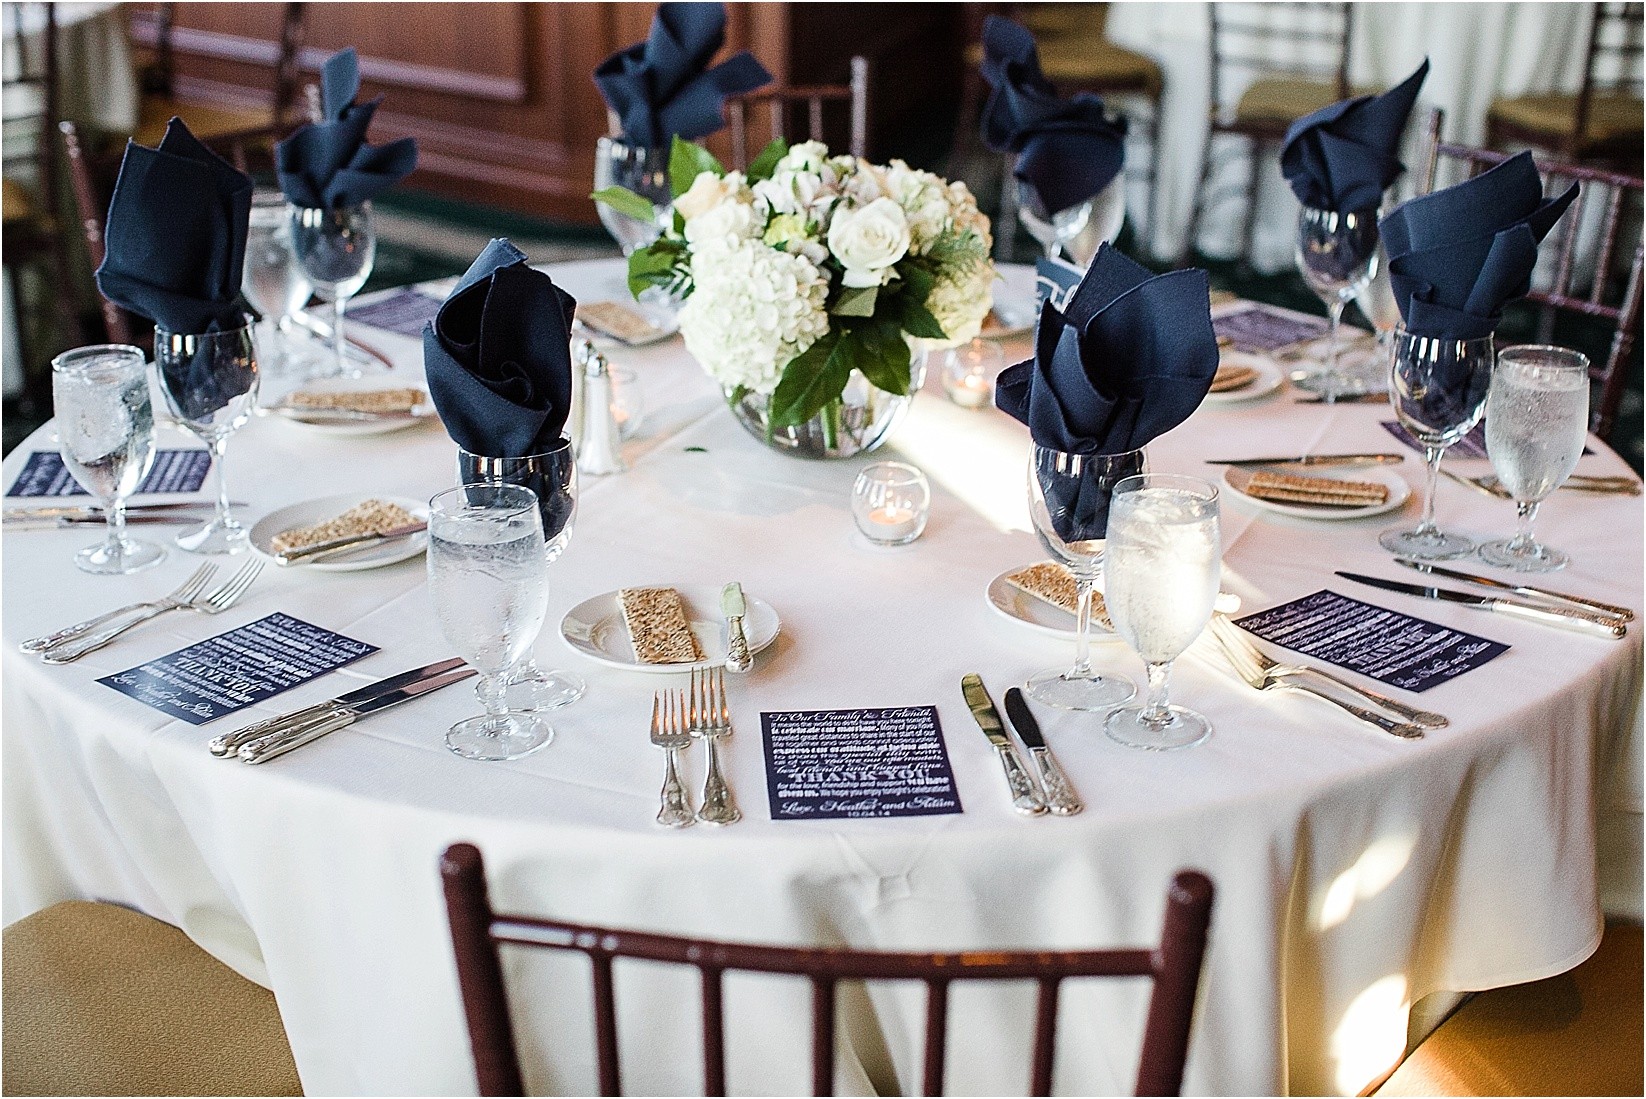 The tables set up during the Charlotte City Club wedding in charlotte North Carolina